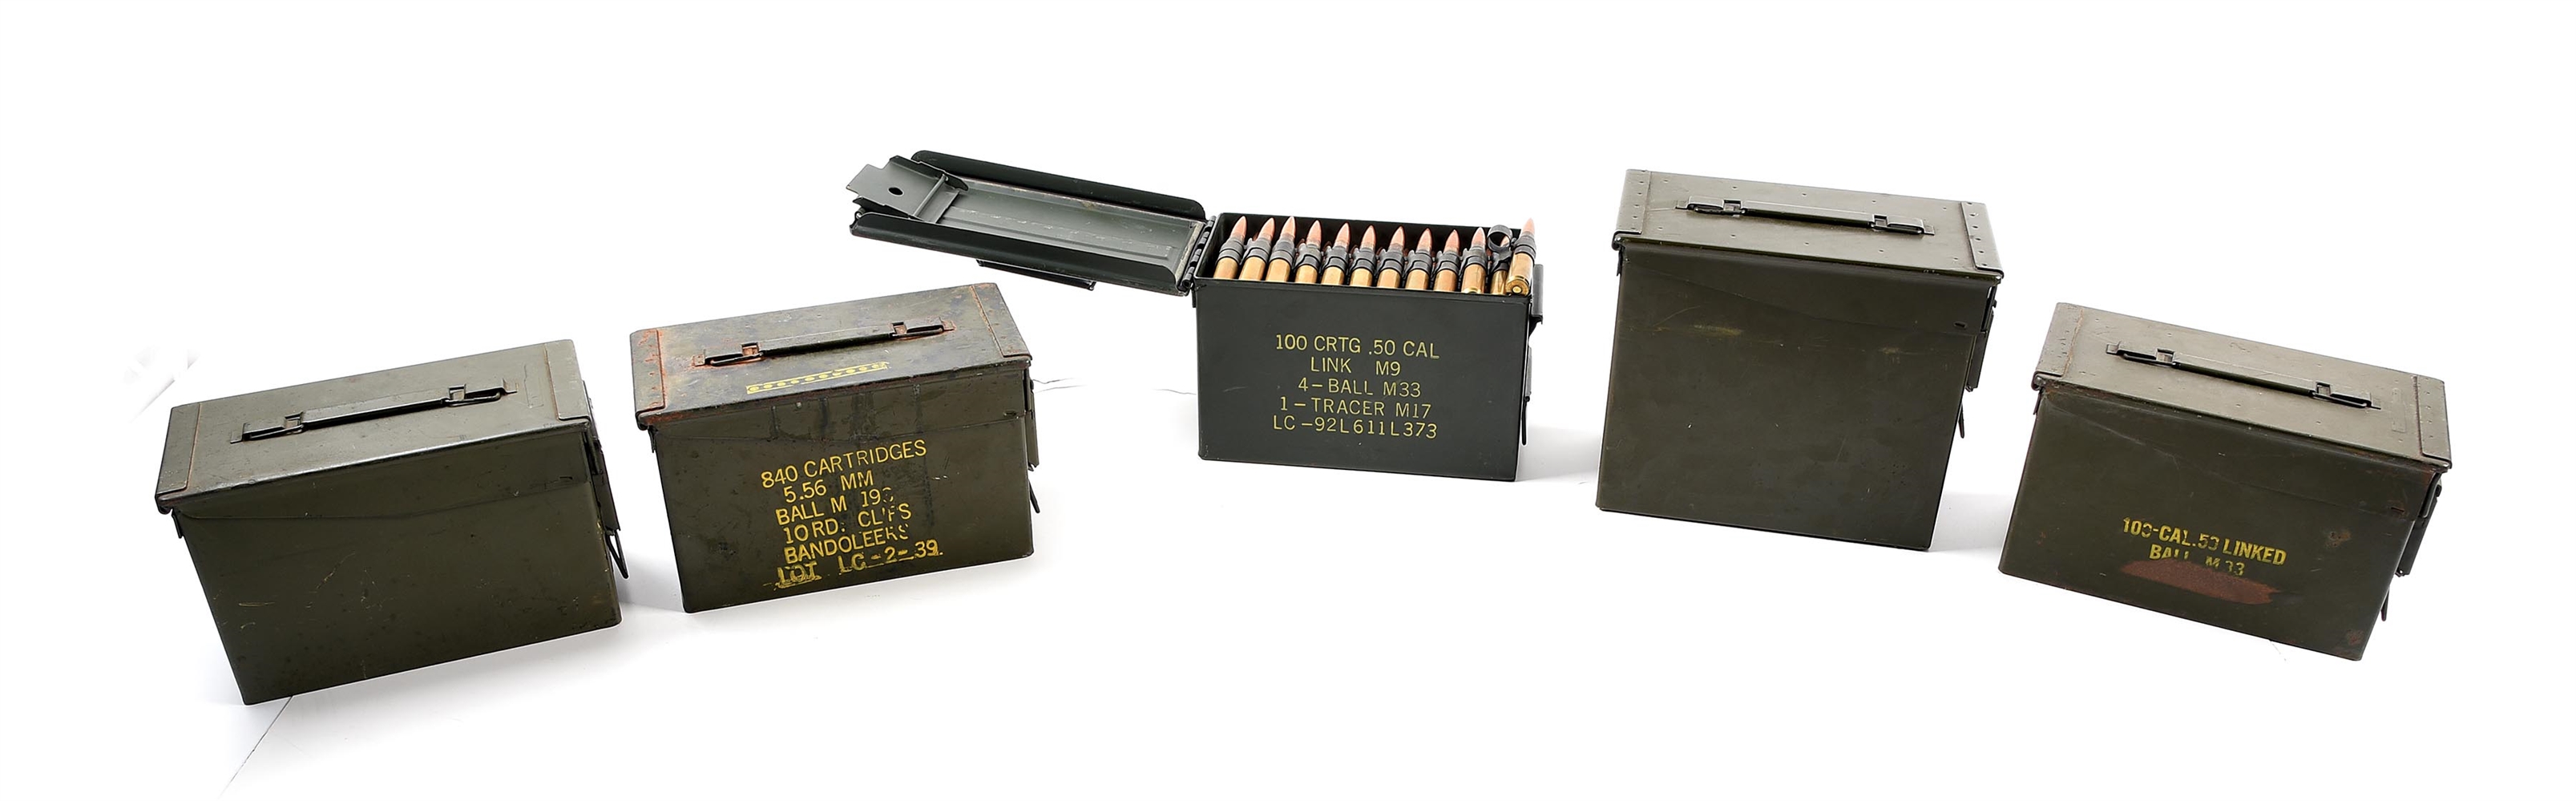 LOT OF 5: FIVE METAL AMMO CANS OF .50 BMG AMMUNITION, APPROXIMATELY 500 ROUNDS.